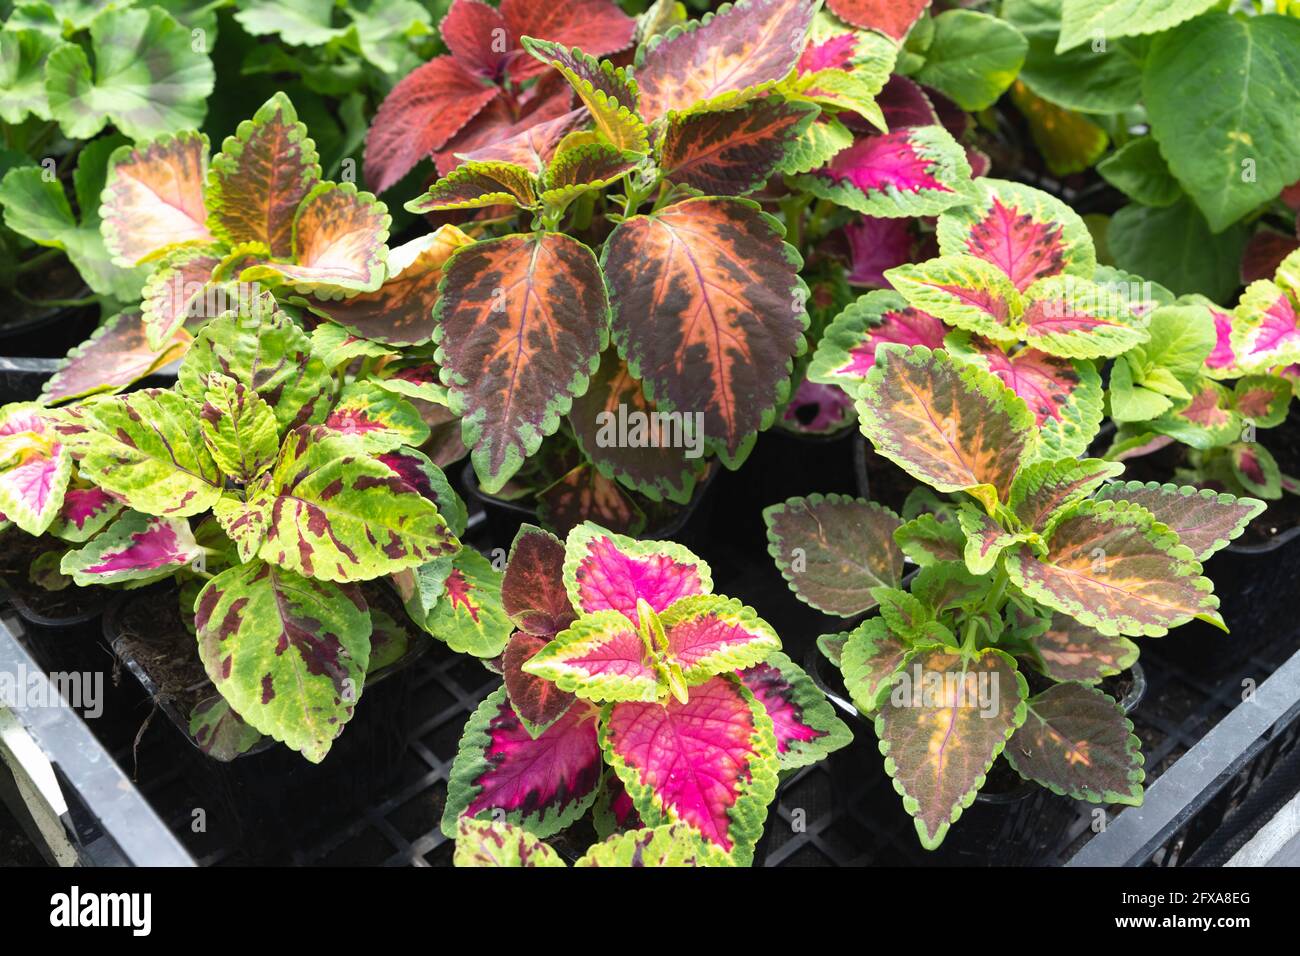 Mix of different spices of Coleus scutellarioides, decorative potted plant with colorful leaves Stock Photo